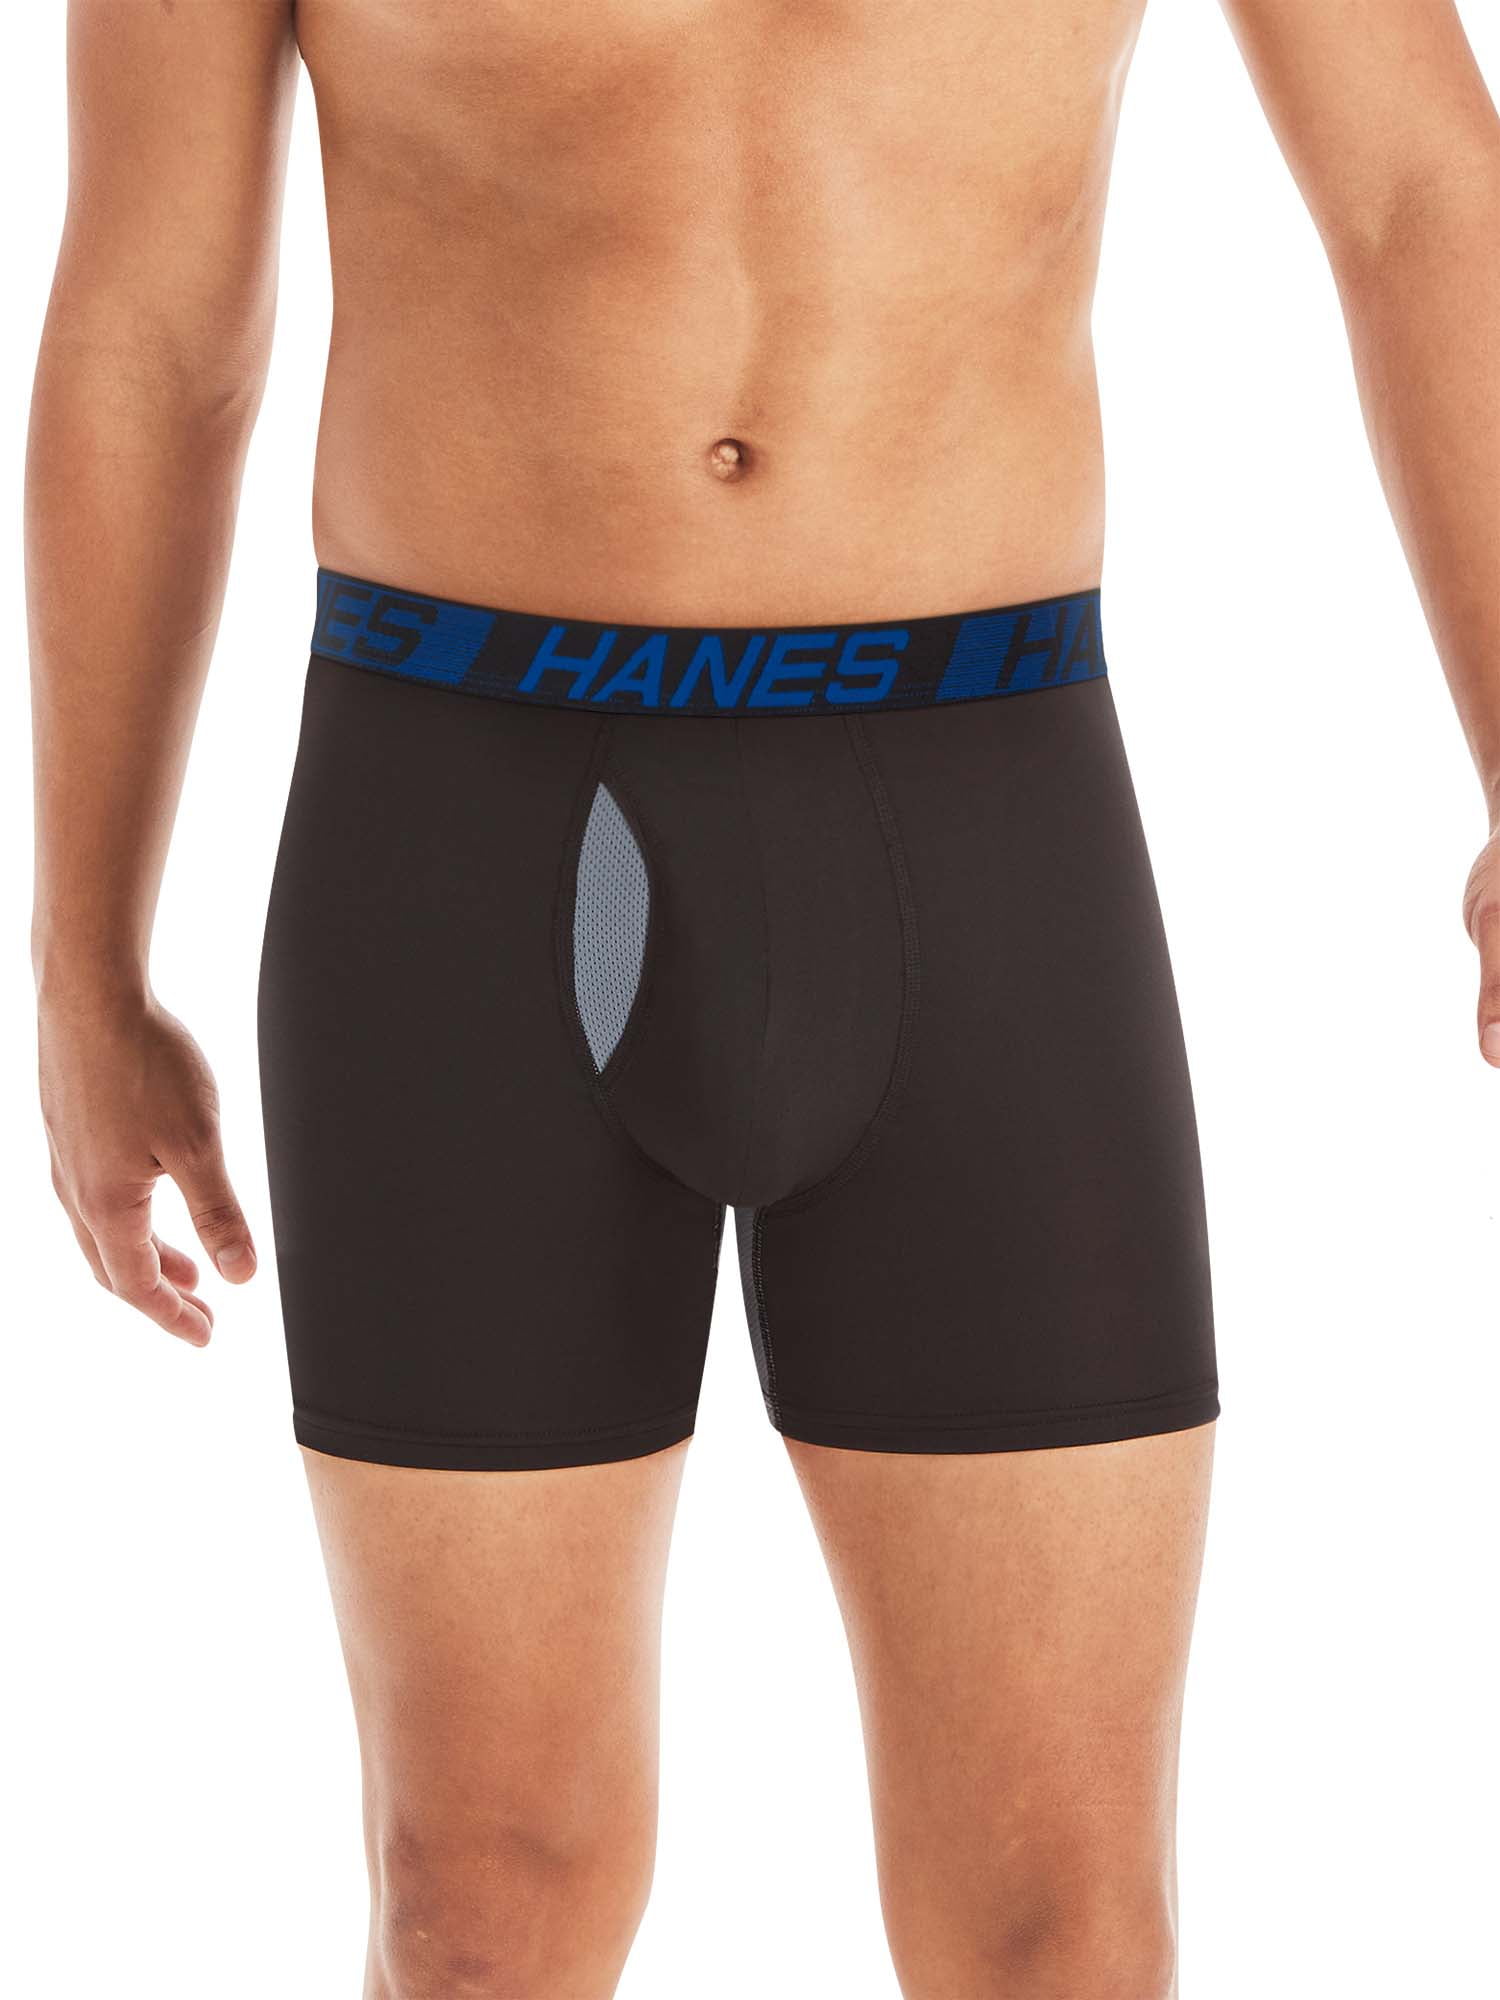 Hanes X-Temp Total Support Pouch Men's Trunks, Anti-Chafing Underwear,  3-Pack 